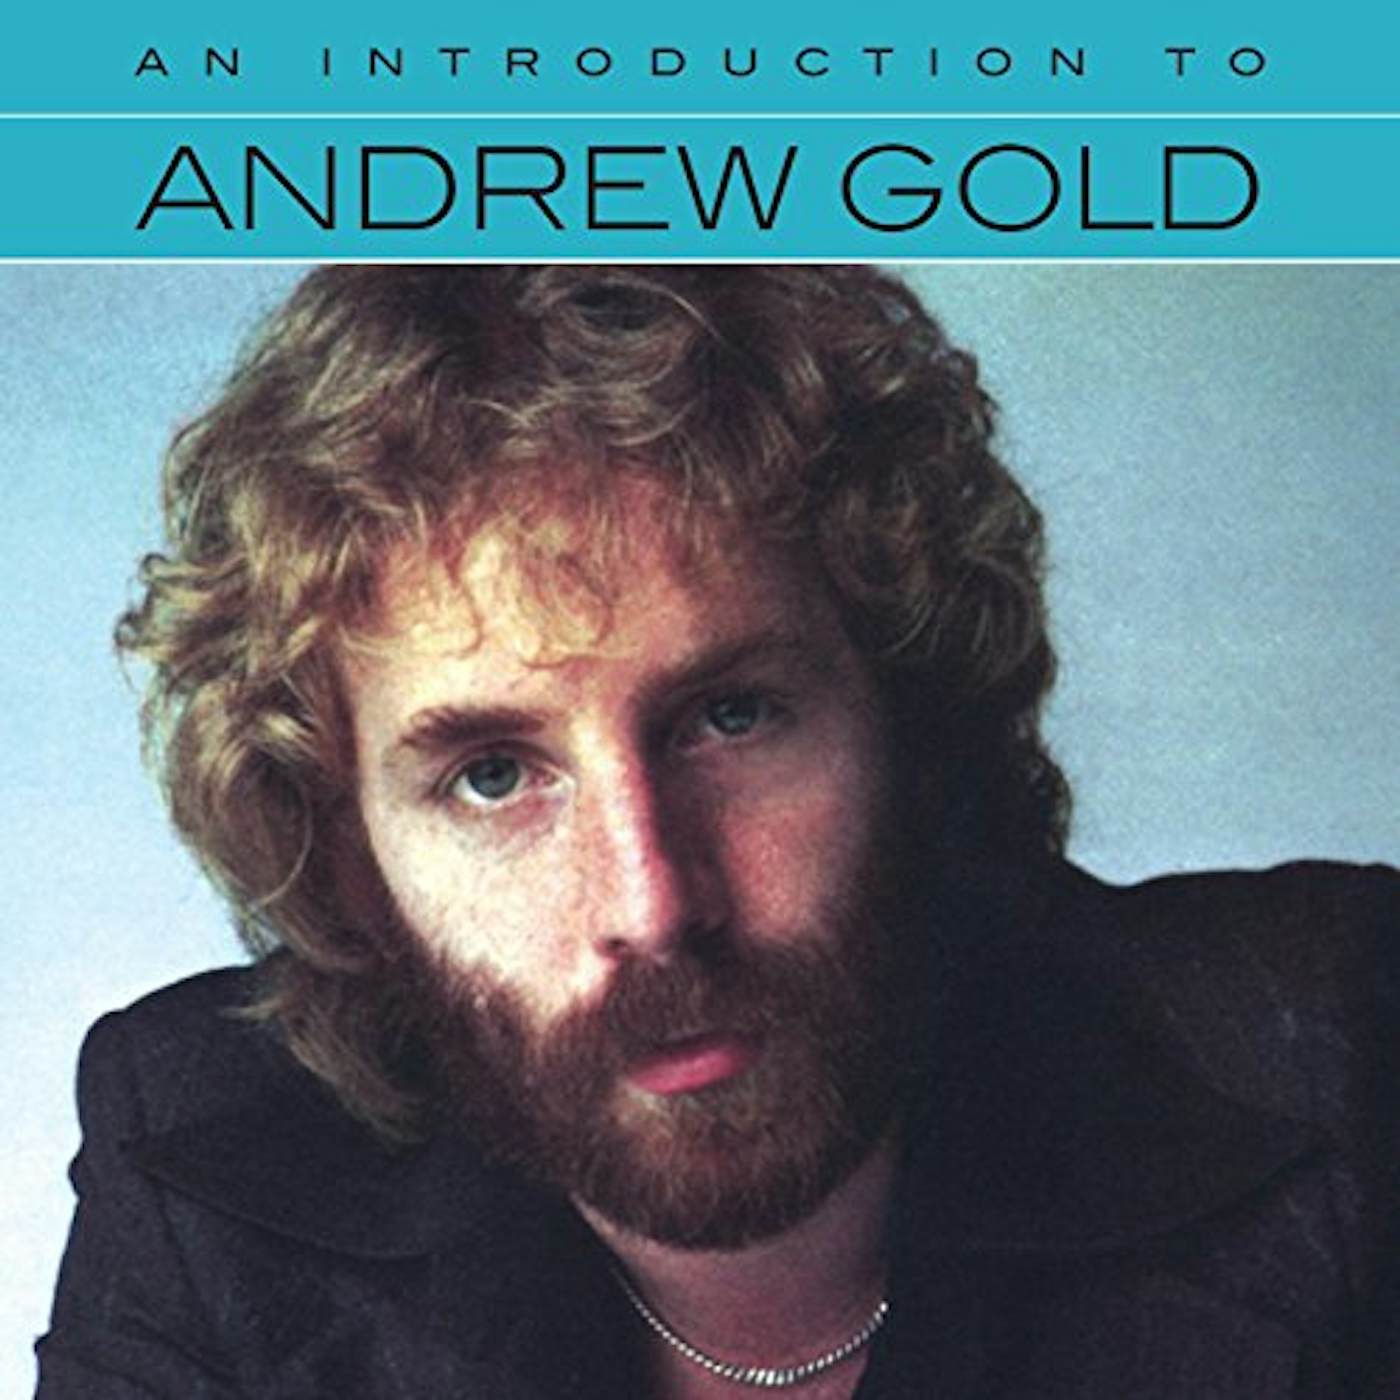 Andrew Gold AN INTRODUCTION TO CD